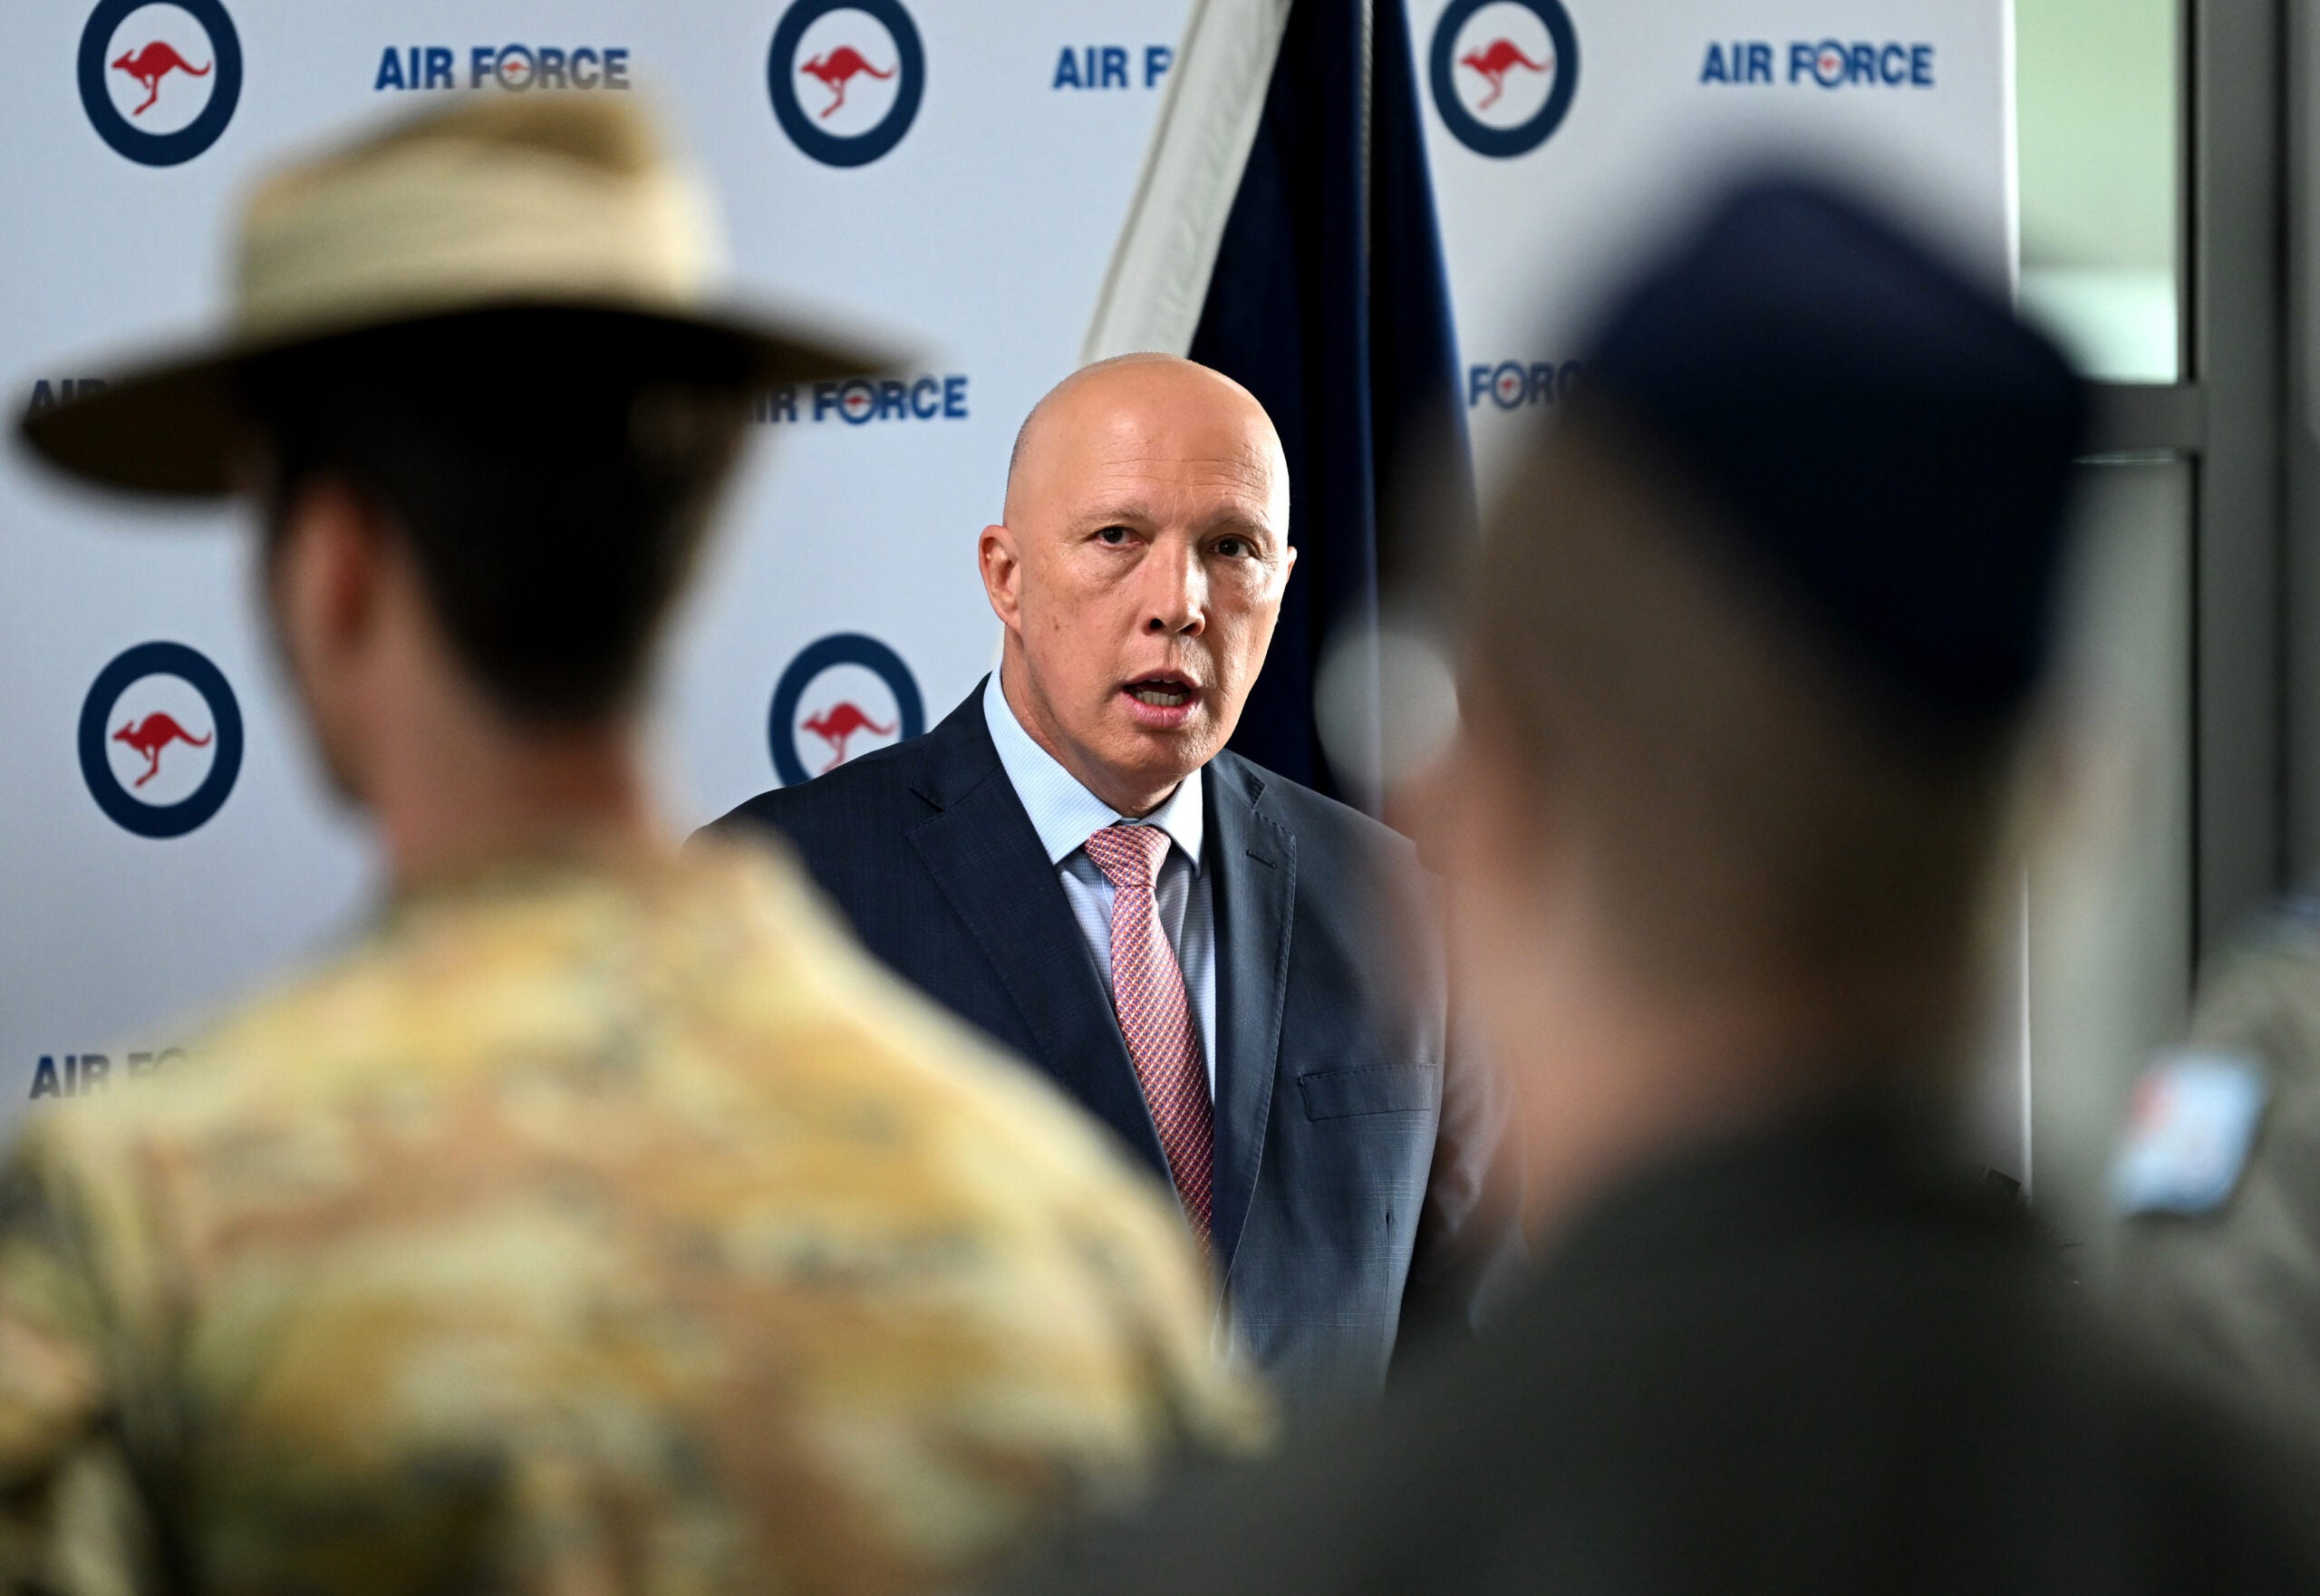 IPSWICH, AUSTRALIA - APRIL 08: Australian Defence Minister Peter Dutton speaks at a Defence medal ceremony at Amberley Air Base on April 08, 2022 in Ipswich, Australia. The Australian Operational Service medal was awarded to the Australian Defence Force (ADF) for their role in evacuating over 4,000 Australians, foreign and Afghan nationals and their families from Afghanistan. (Photo by Dan Peled/Getty Images)